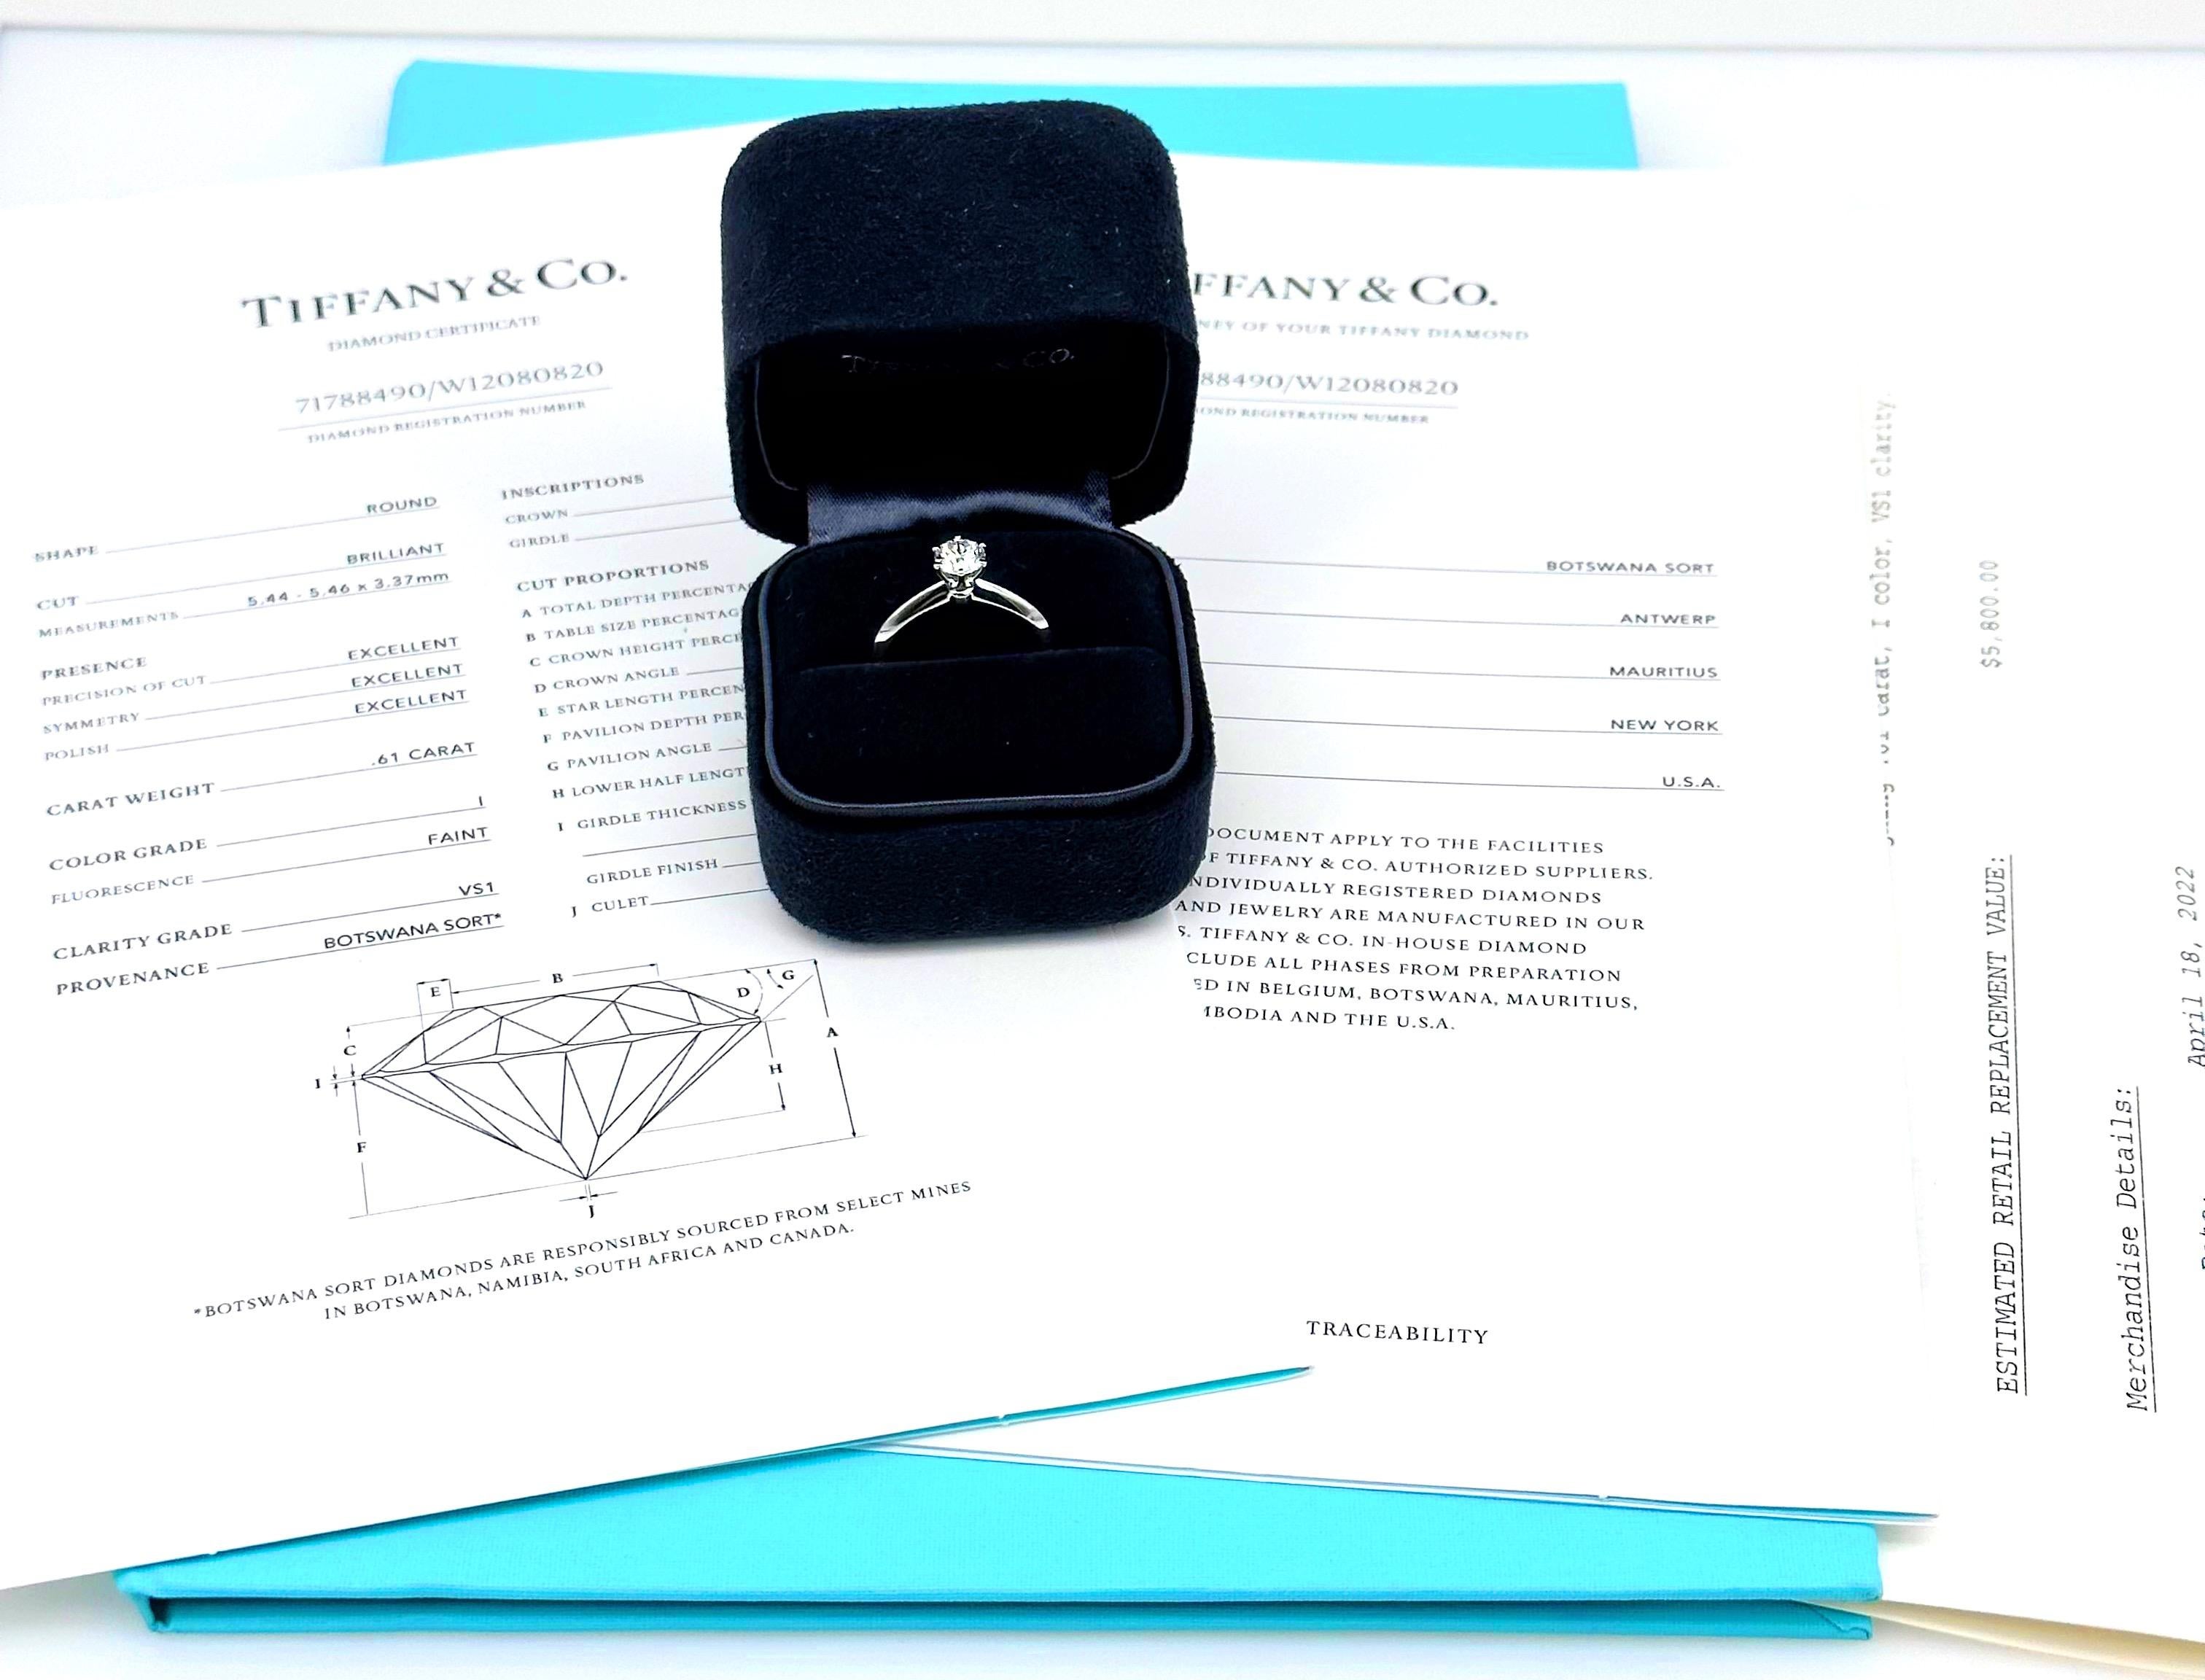 Tiffany & Co Round Diamond Engagement Ring
Style:  Tiffany 6-Prong Setting 
Ref. number:  71788490/W12080820  Tiffany Diamond Certificate
Metal:   Platinum PT950
Size:  6 sizable
TCW:  0.61 tcw
Main Diamond:  Round Brilliant Diamond
Color & Clarity: